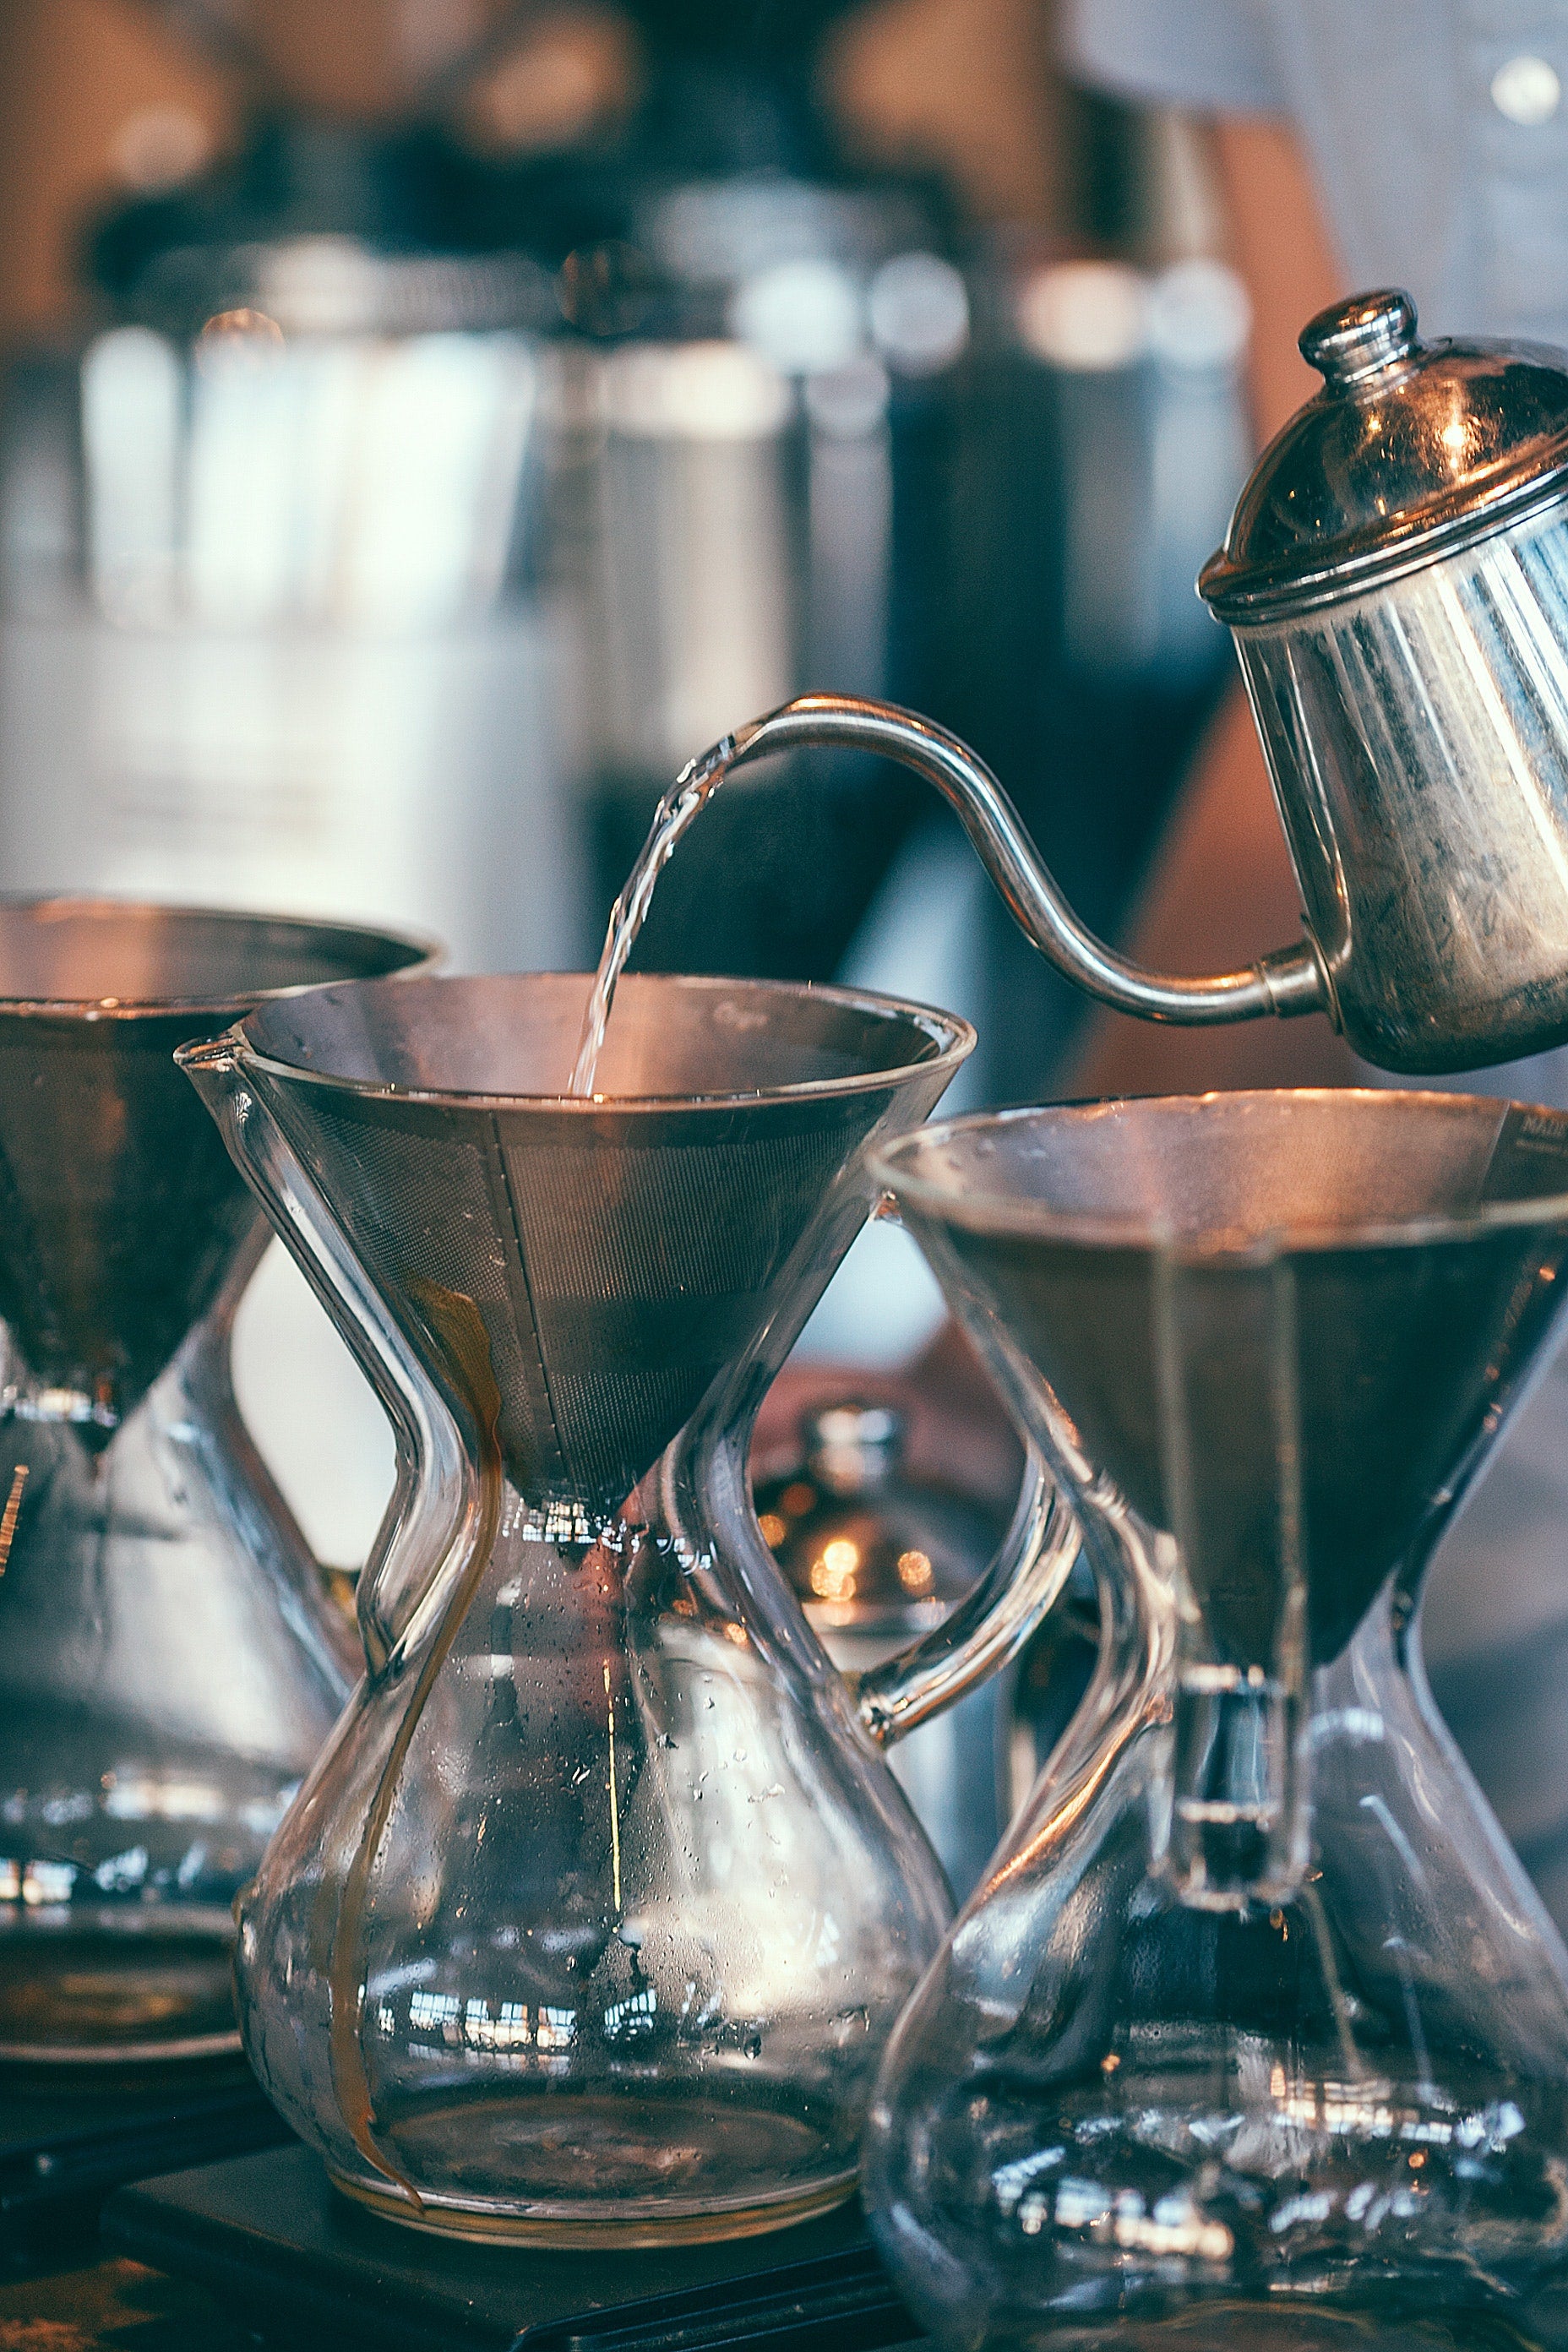 image: coffee being made with the pour over brewing method